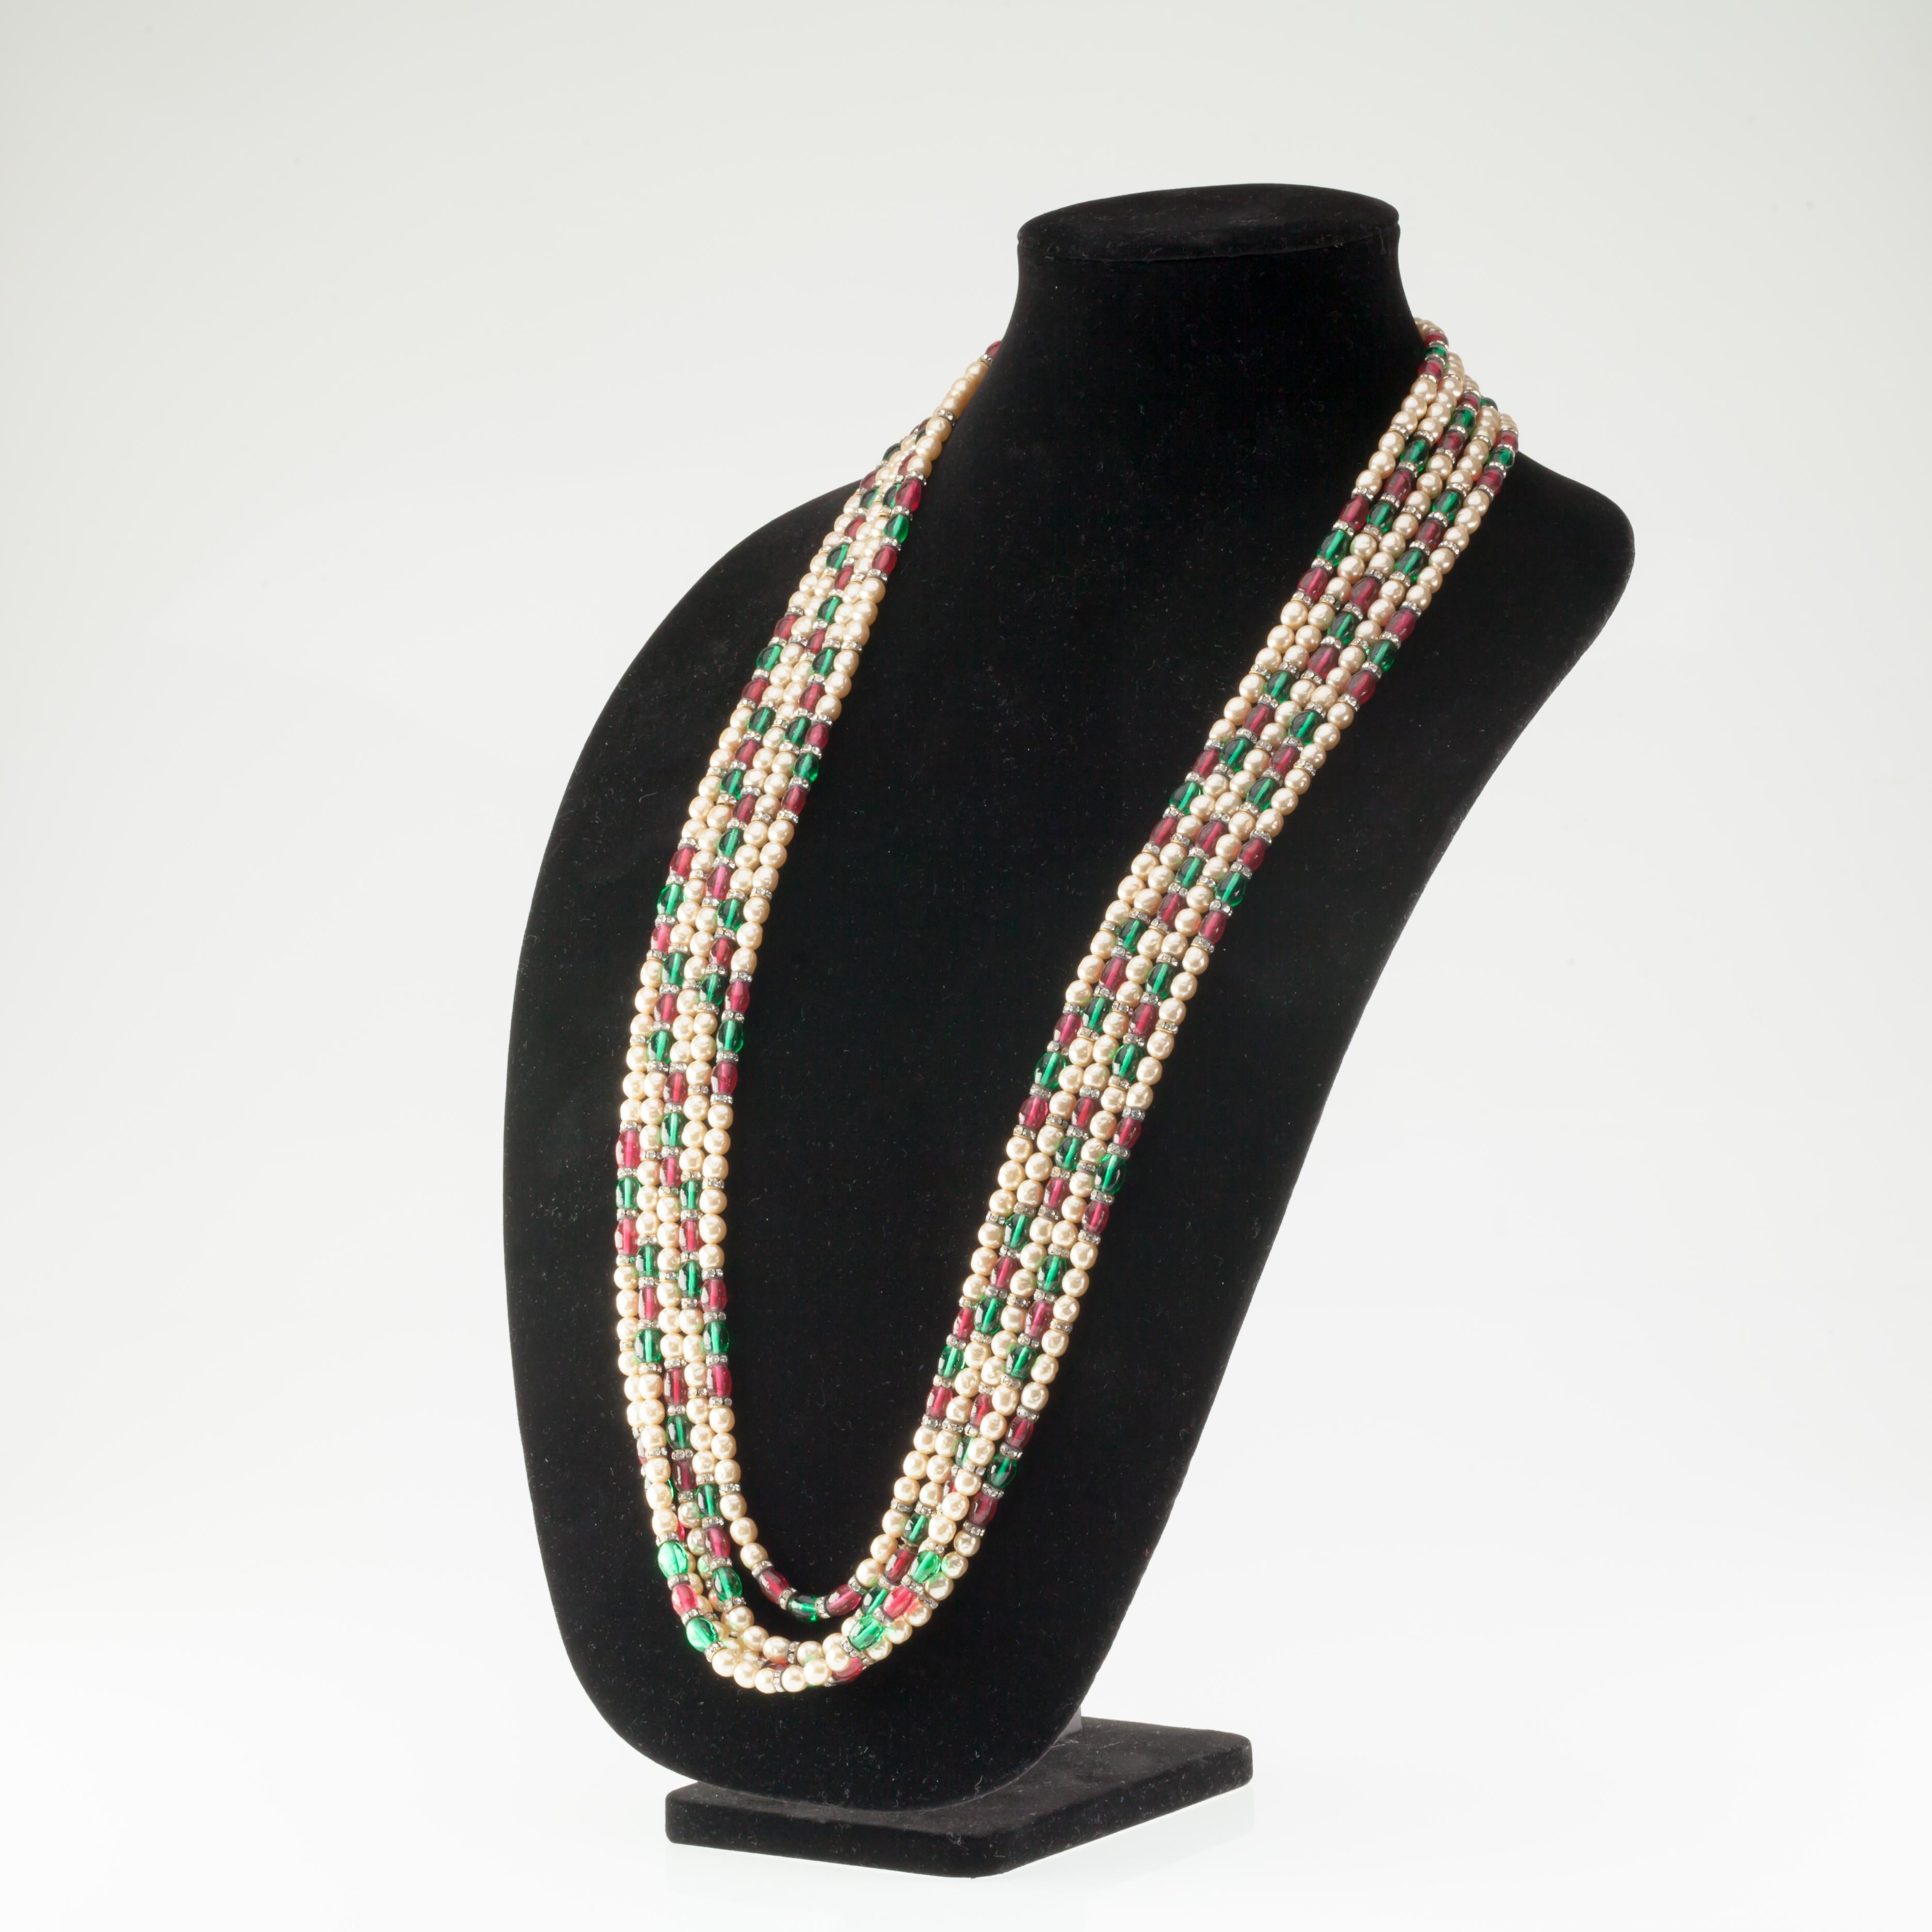 Gorgeous Chanel 5-Strand Costume Necklace
Features 5 Increasing Strands of Alternating Faux Pearls and Gripoix Green and Red Beads with Crystal-Studded Elements
Year of Manufacture: 1970s (Vintage Style Chanel Tag)
Length of Shortest Strand =